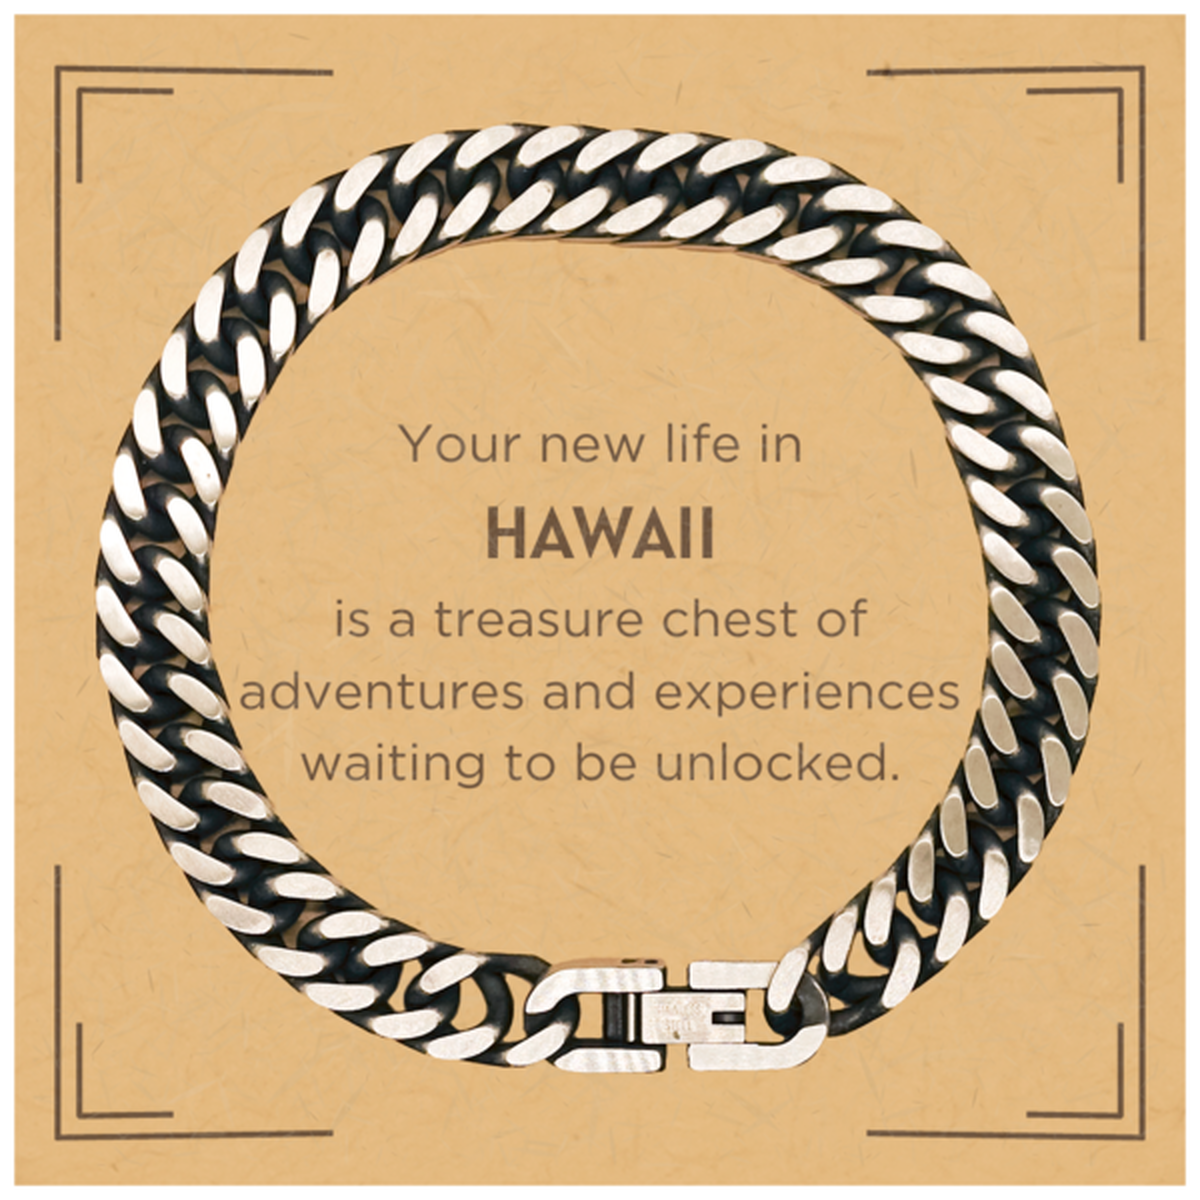 Moving to Hawaii Gifts, Your new life in Hawaii, Long Distance Hawaii Christmas Cuban Link Chain Bracelet For Men, Women, Friends, Coworkers